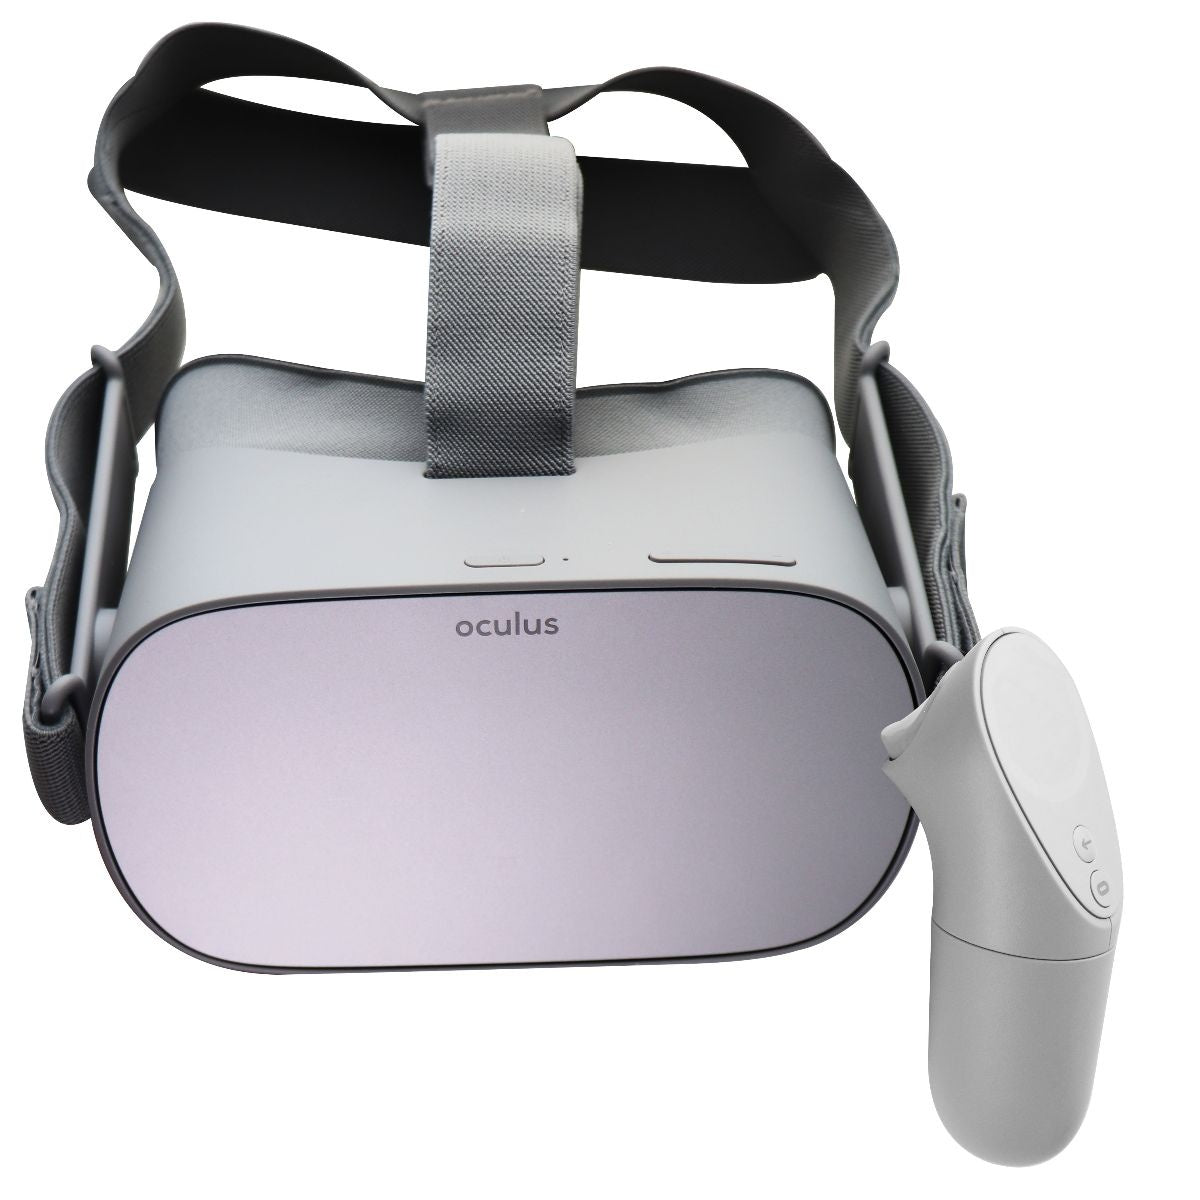 Oculus Go Standalone Virtual Reality Headset - 64GB (MH-A64)